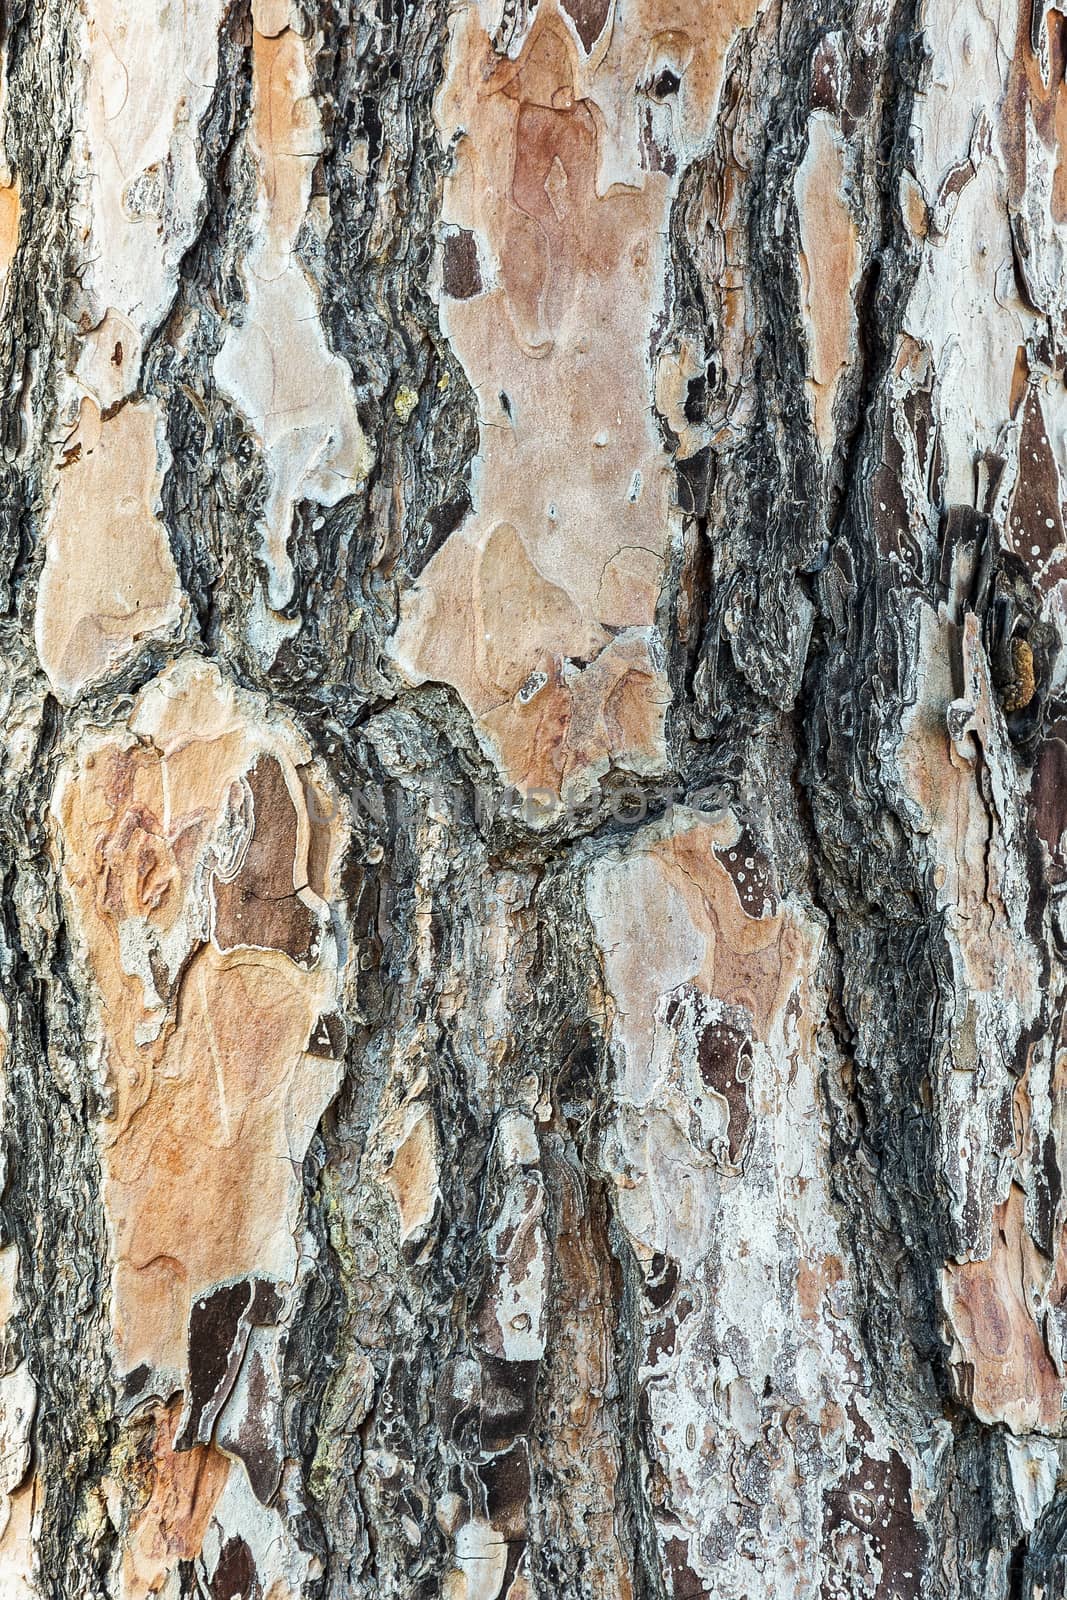 Natural texture of woody bark of a pine tree by Grommik